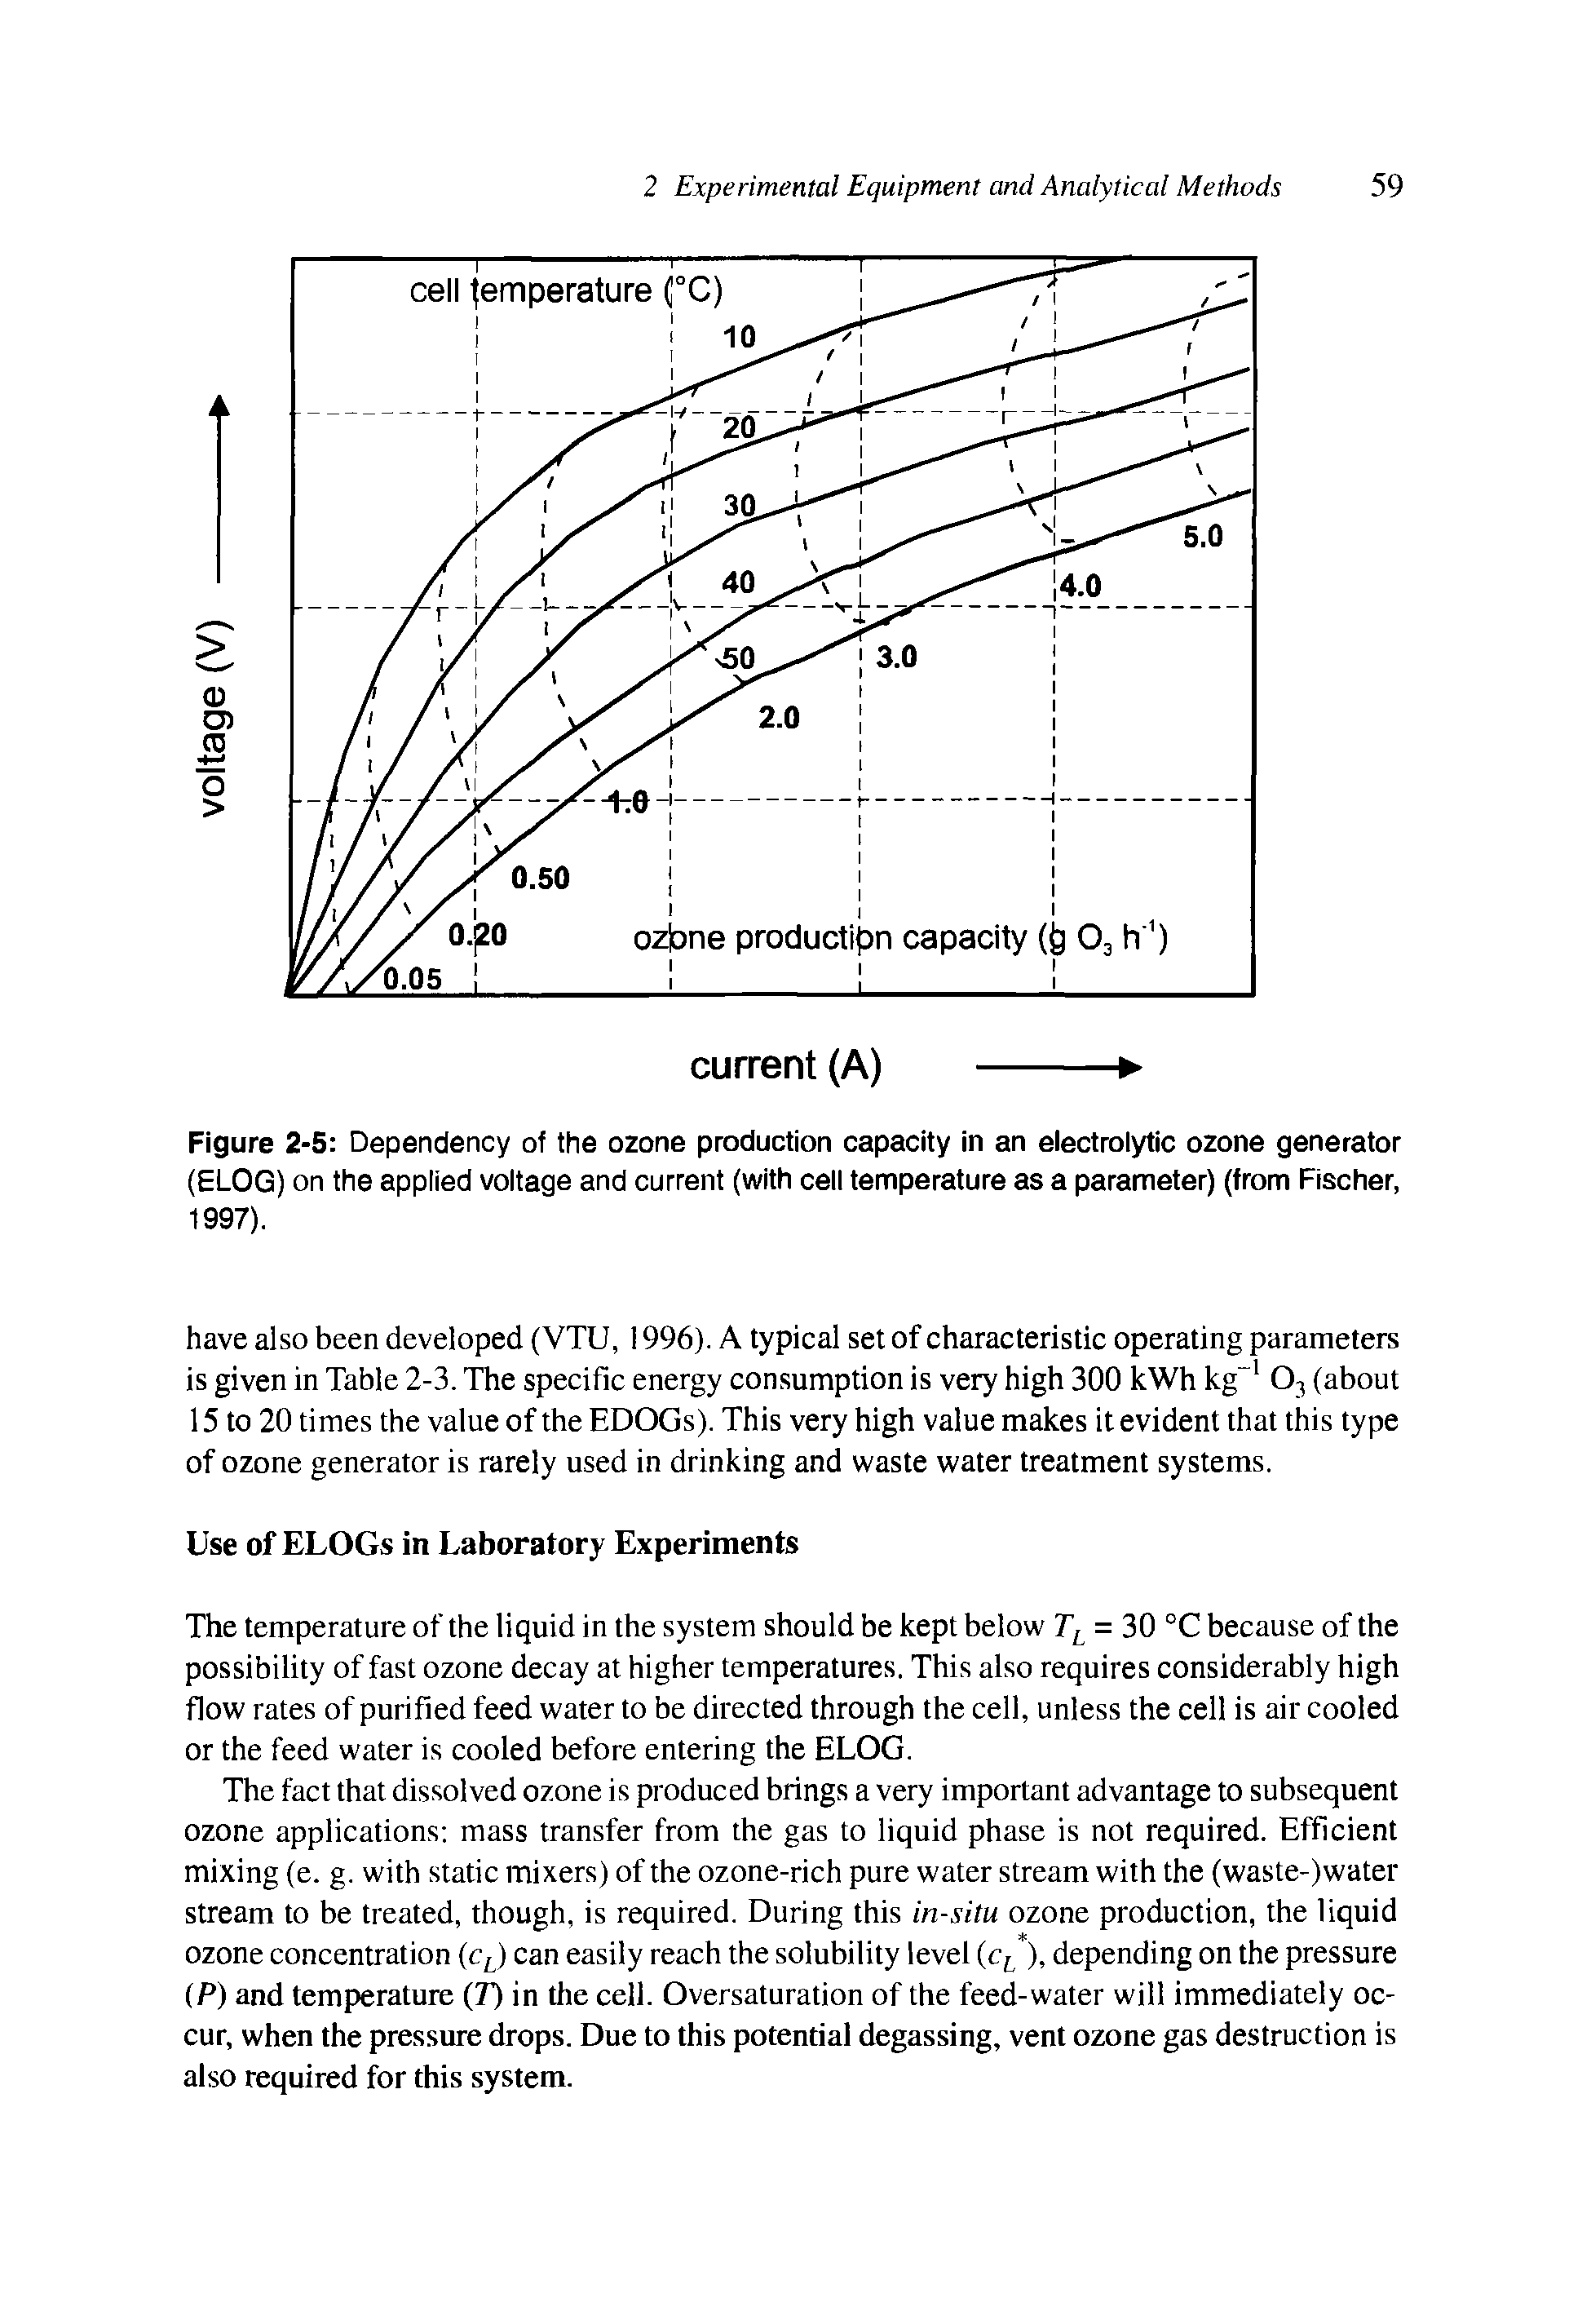 Figure 2-5 Dependency of the ozone production capacity in an electrolytic ozone generator (ELOG) on the applied voltage and current (with cell temperature as a parameter) (from Fischer, 1997).